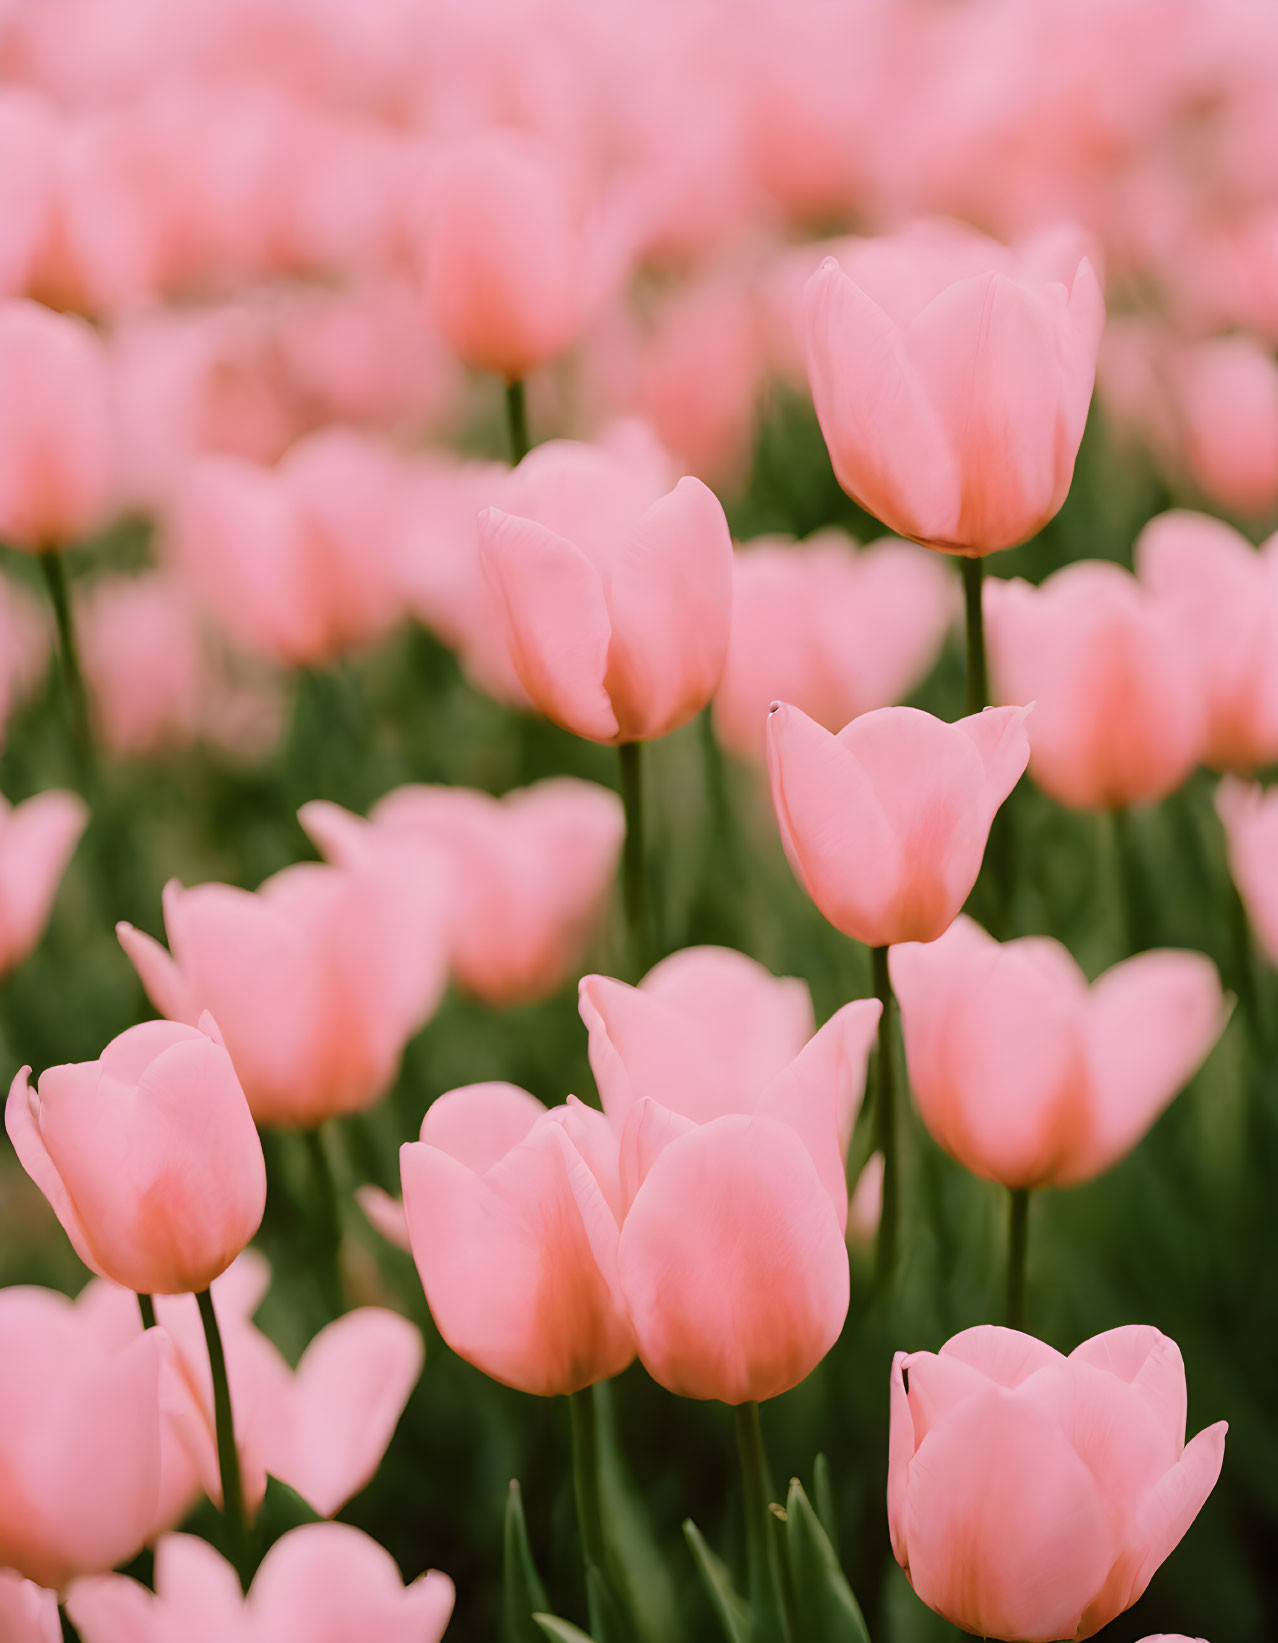 Soft Pink Tulip Field in Full Bloom: Tranquil and Romantic Scene